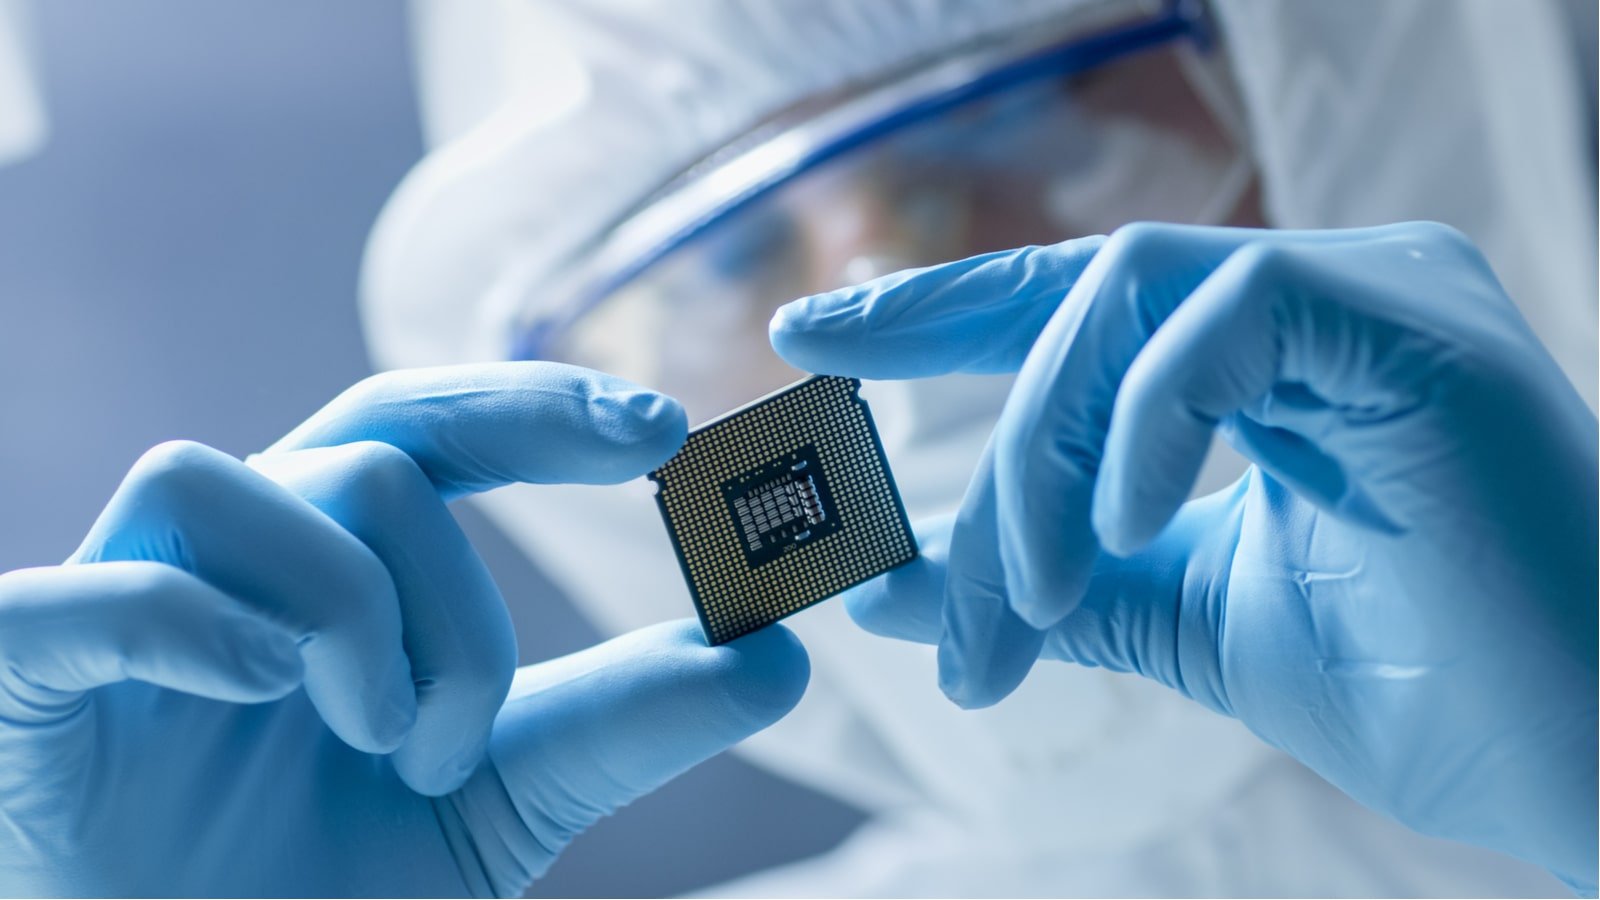 The 3 Most Undervalued Semiconductor Stocks to Buy in February 2023